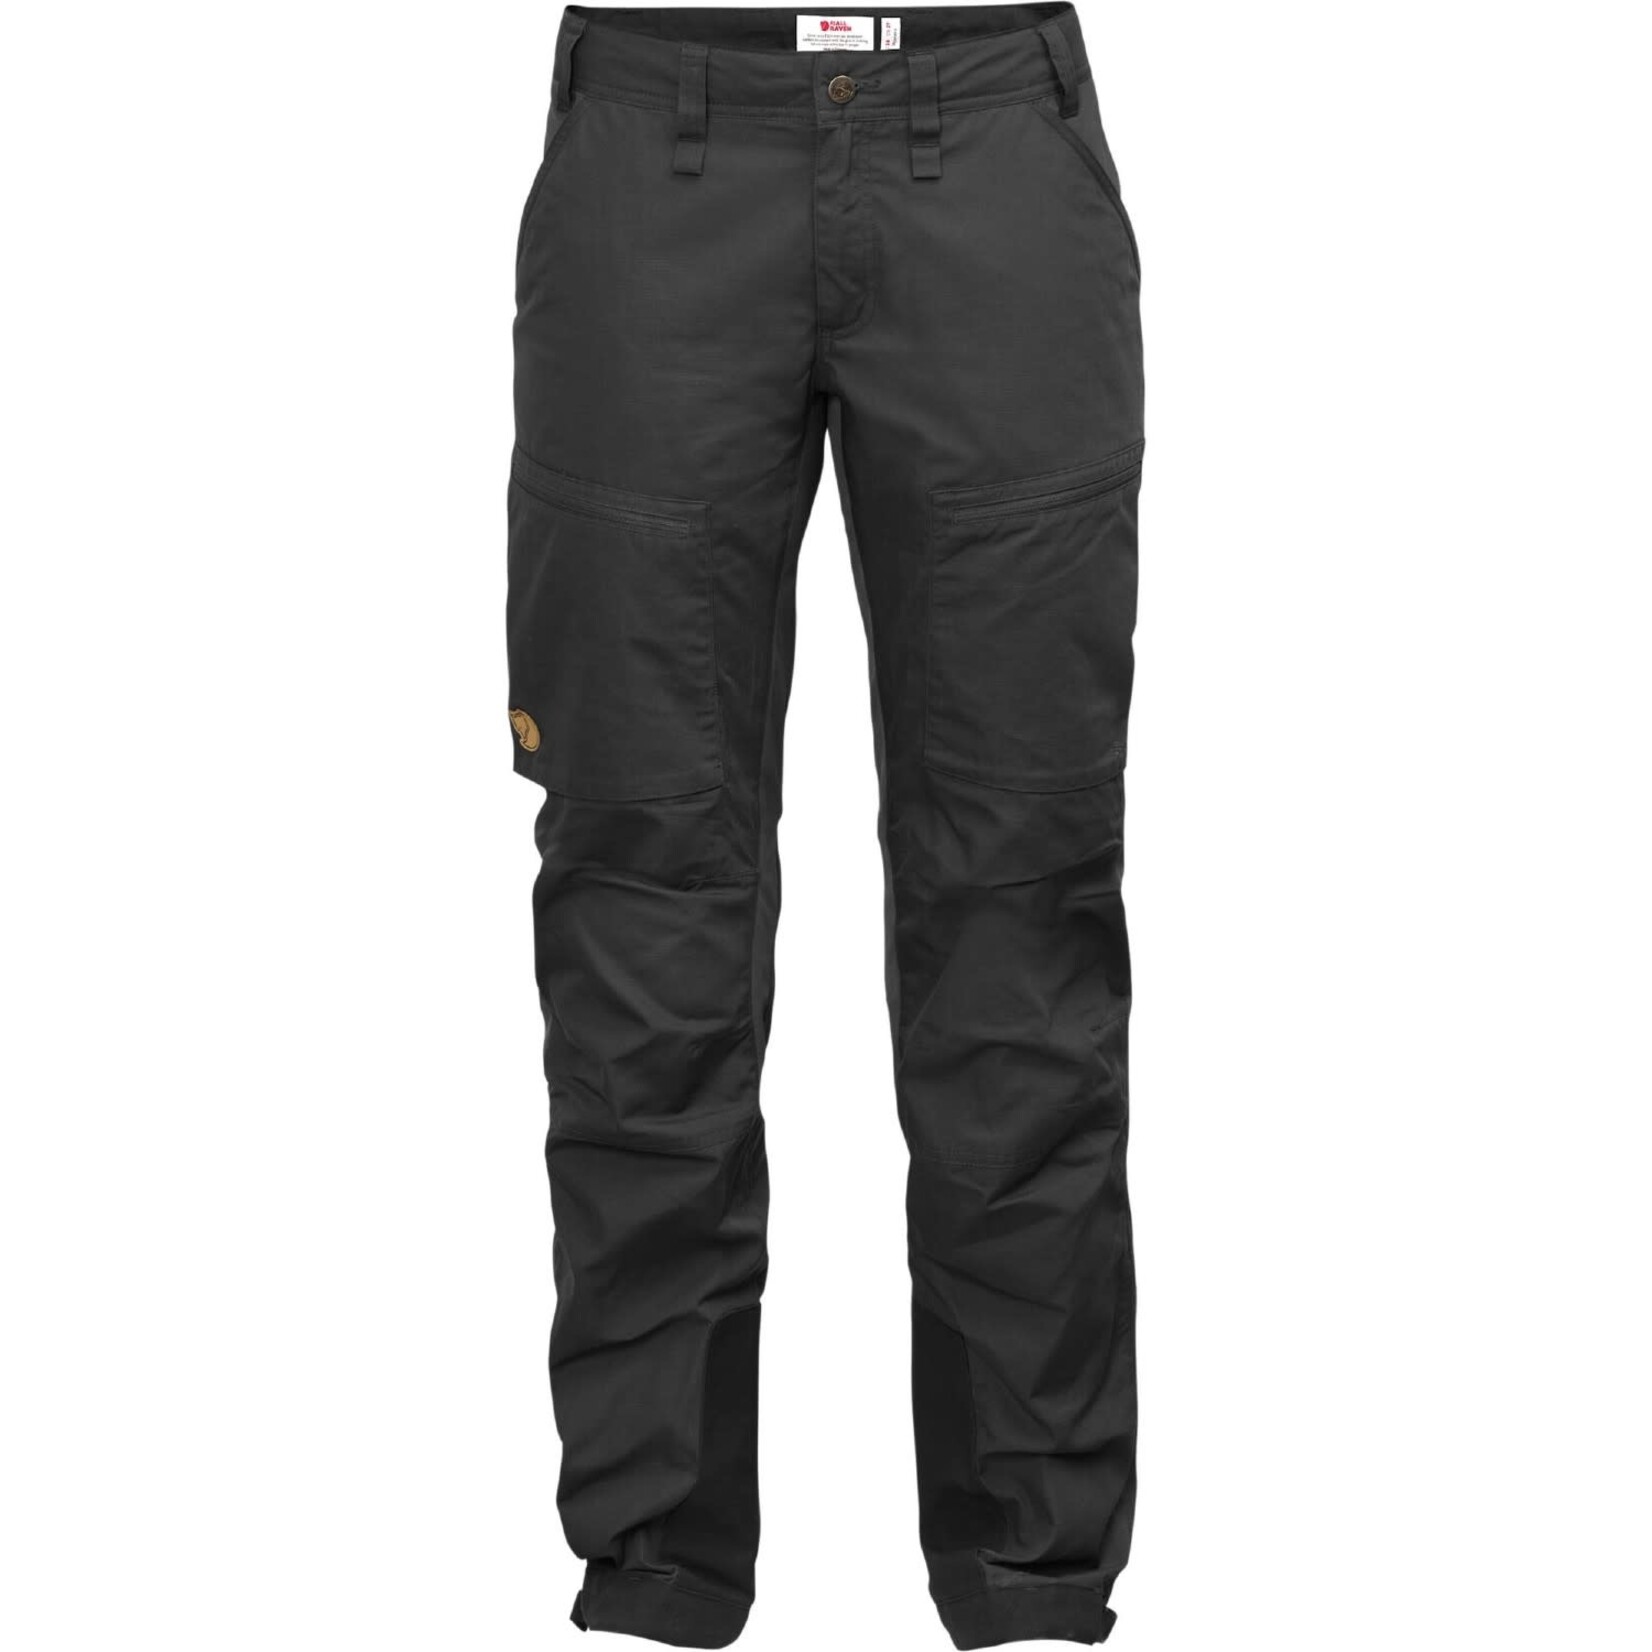 Trekking trousers and all-weather trousers | Men and women